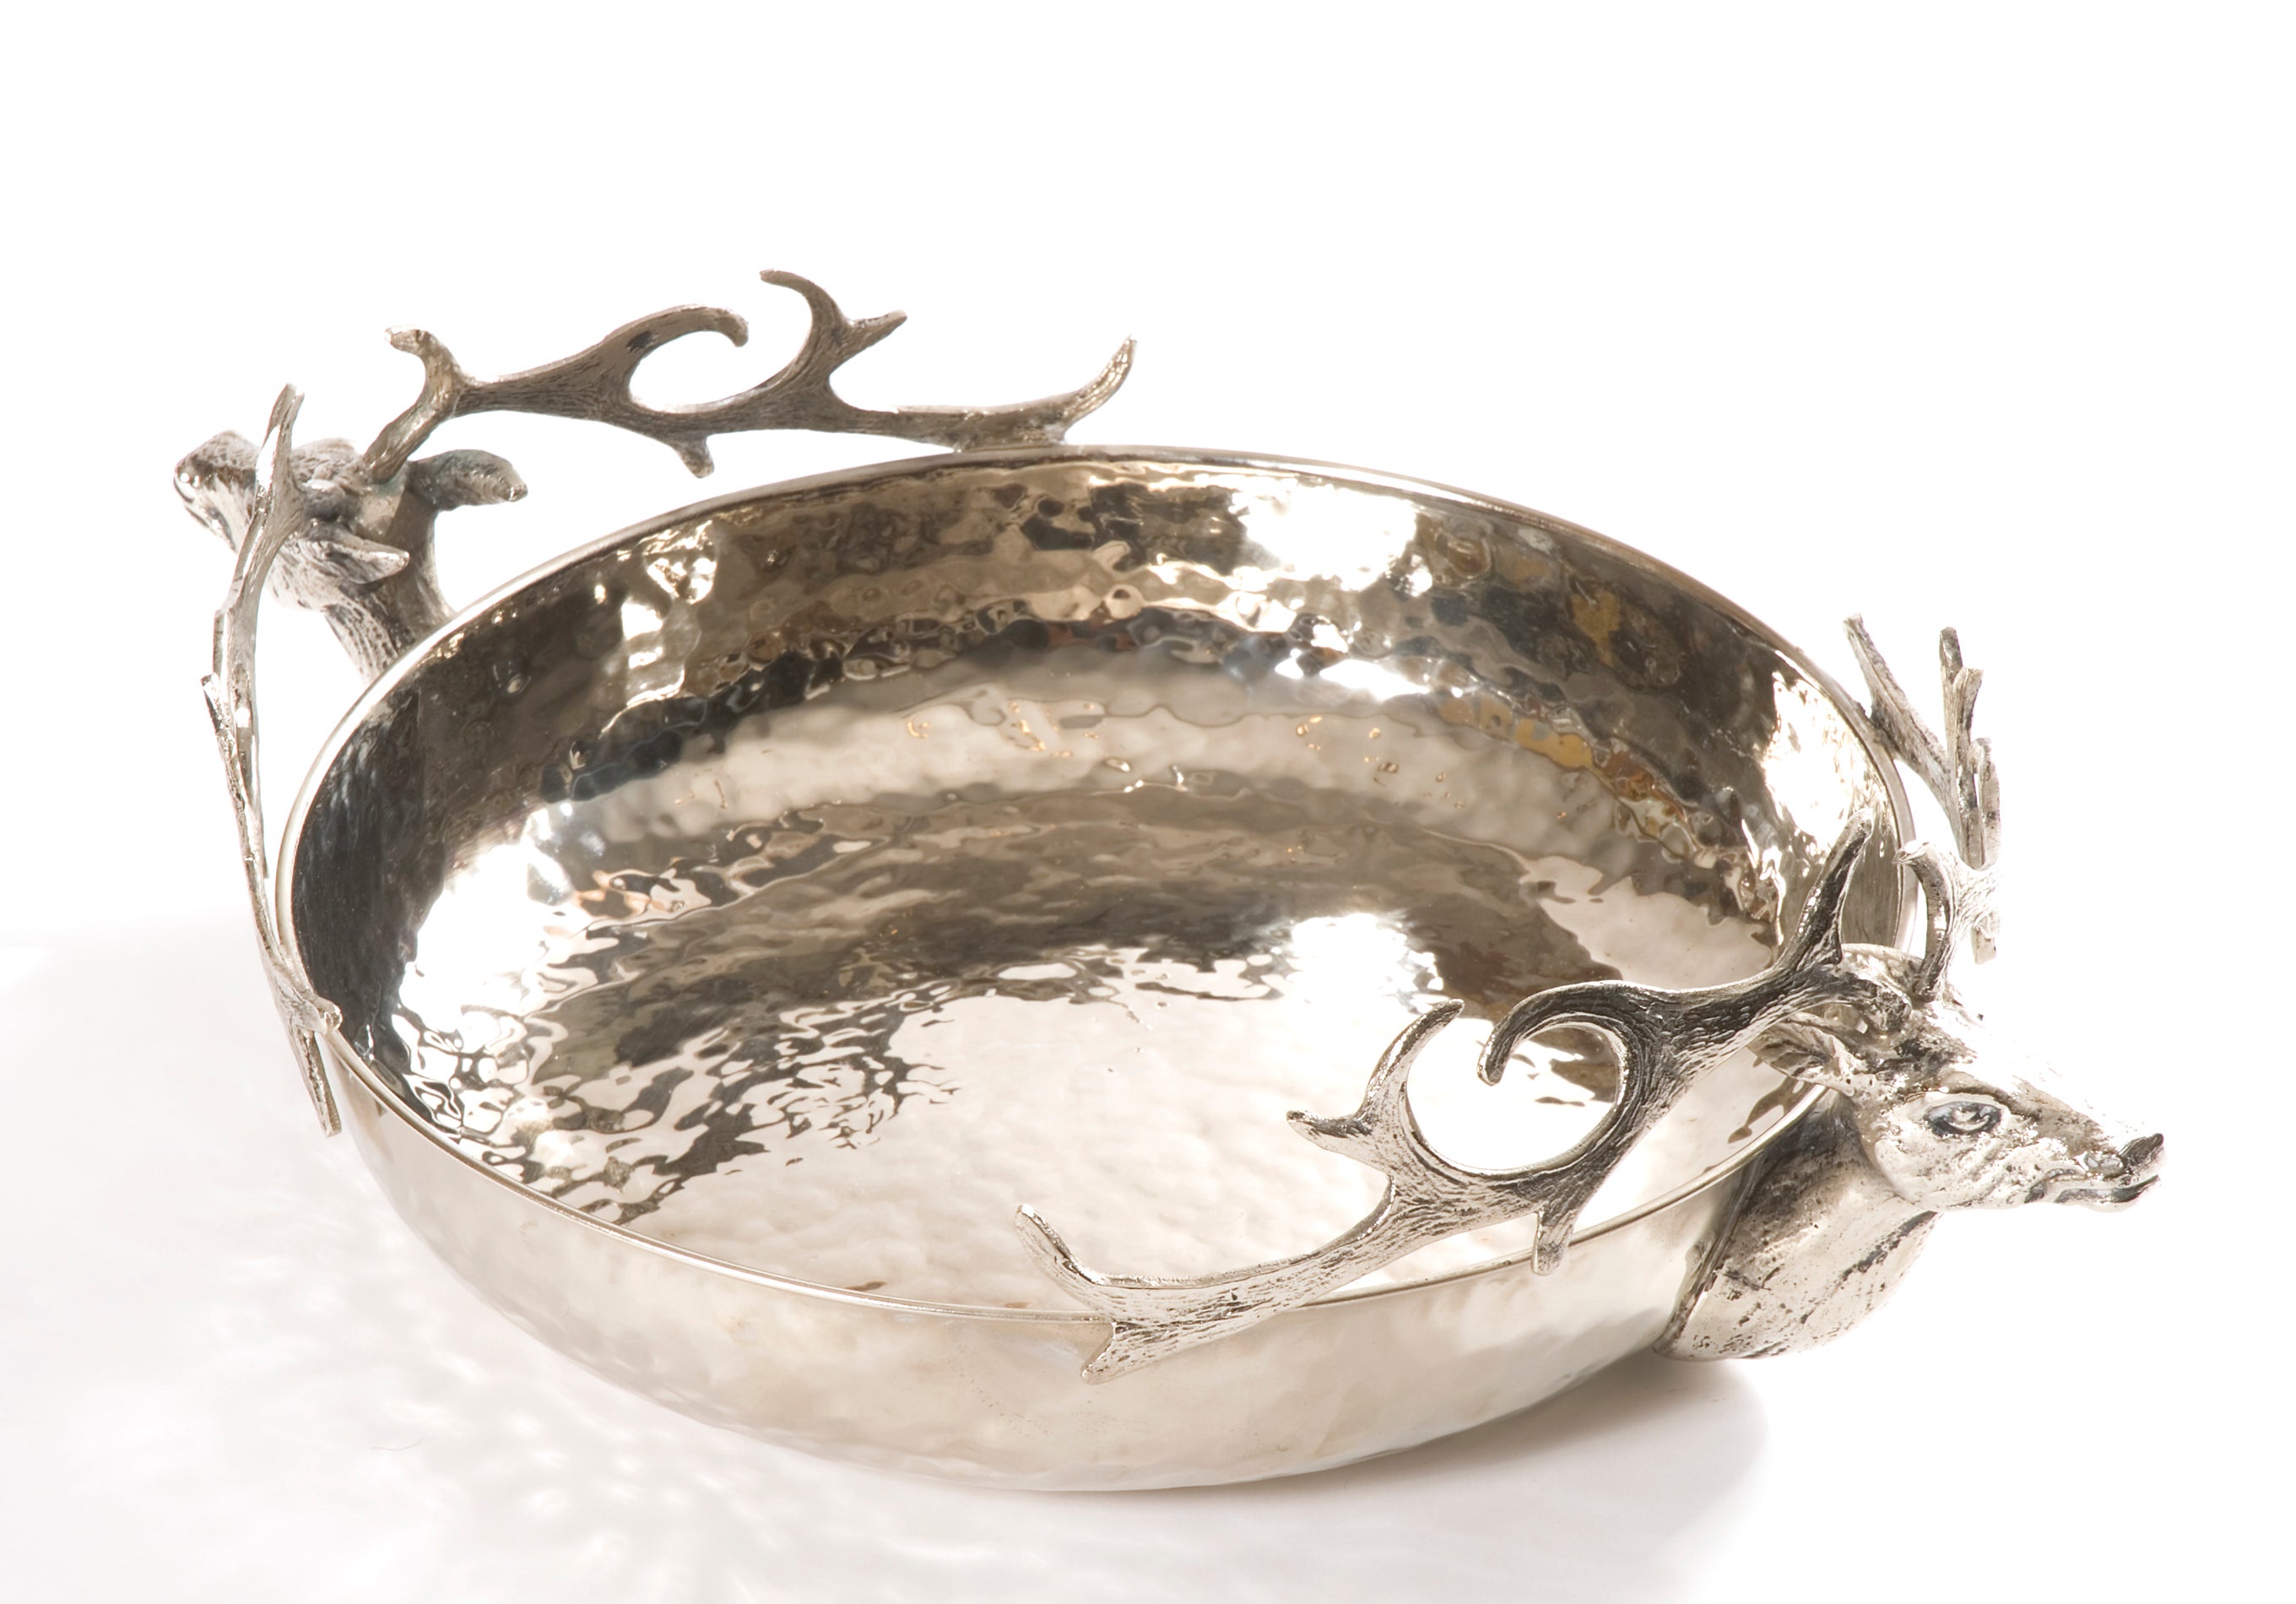  Spanish Hammered Silver Bowl with Stag Detail